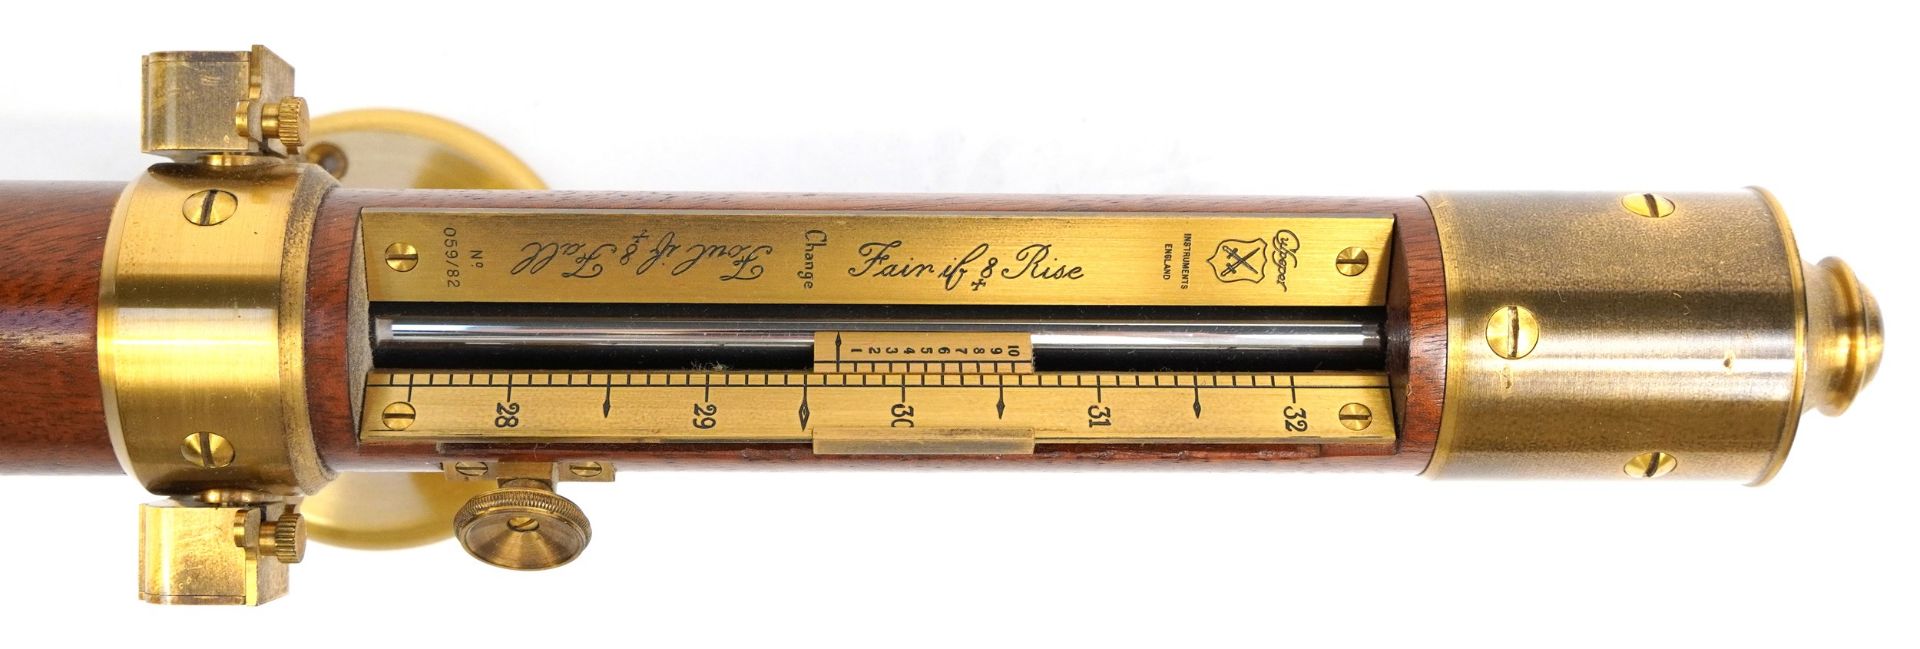 Mahogany and brass ship's stick barometer by Culpeper Instruments numbered 059/82, 96.5cm in length - Bild 2 aus 3